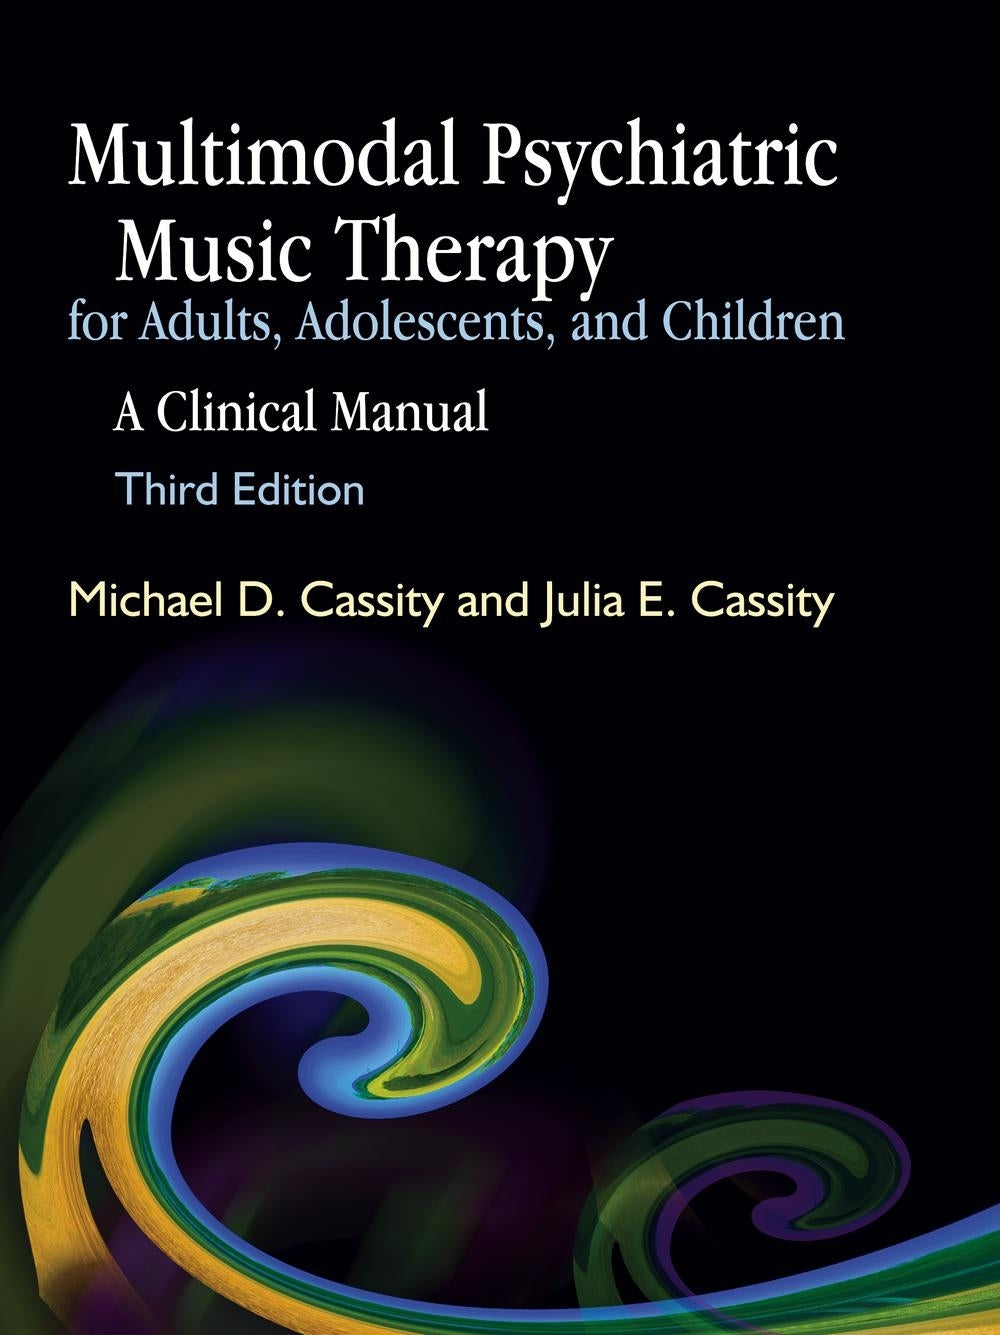 Multimodal Psychiatric Music Therapy for Adults, Adolescents, and Children by Michael Cassity